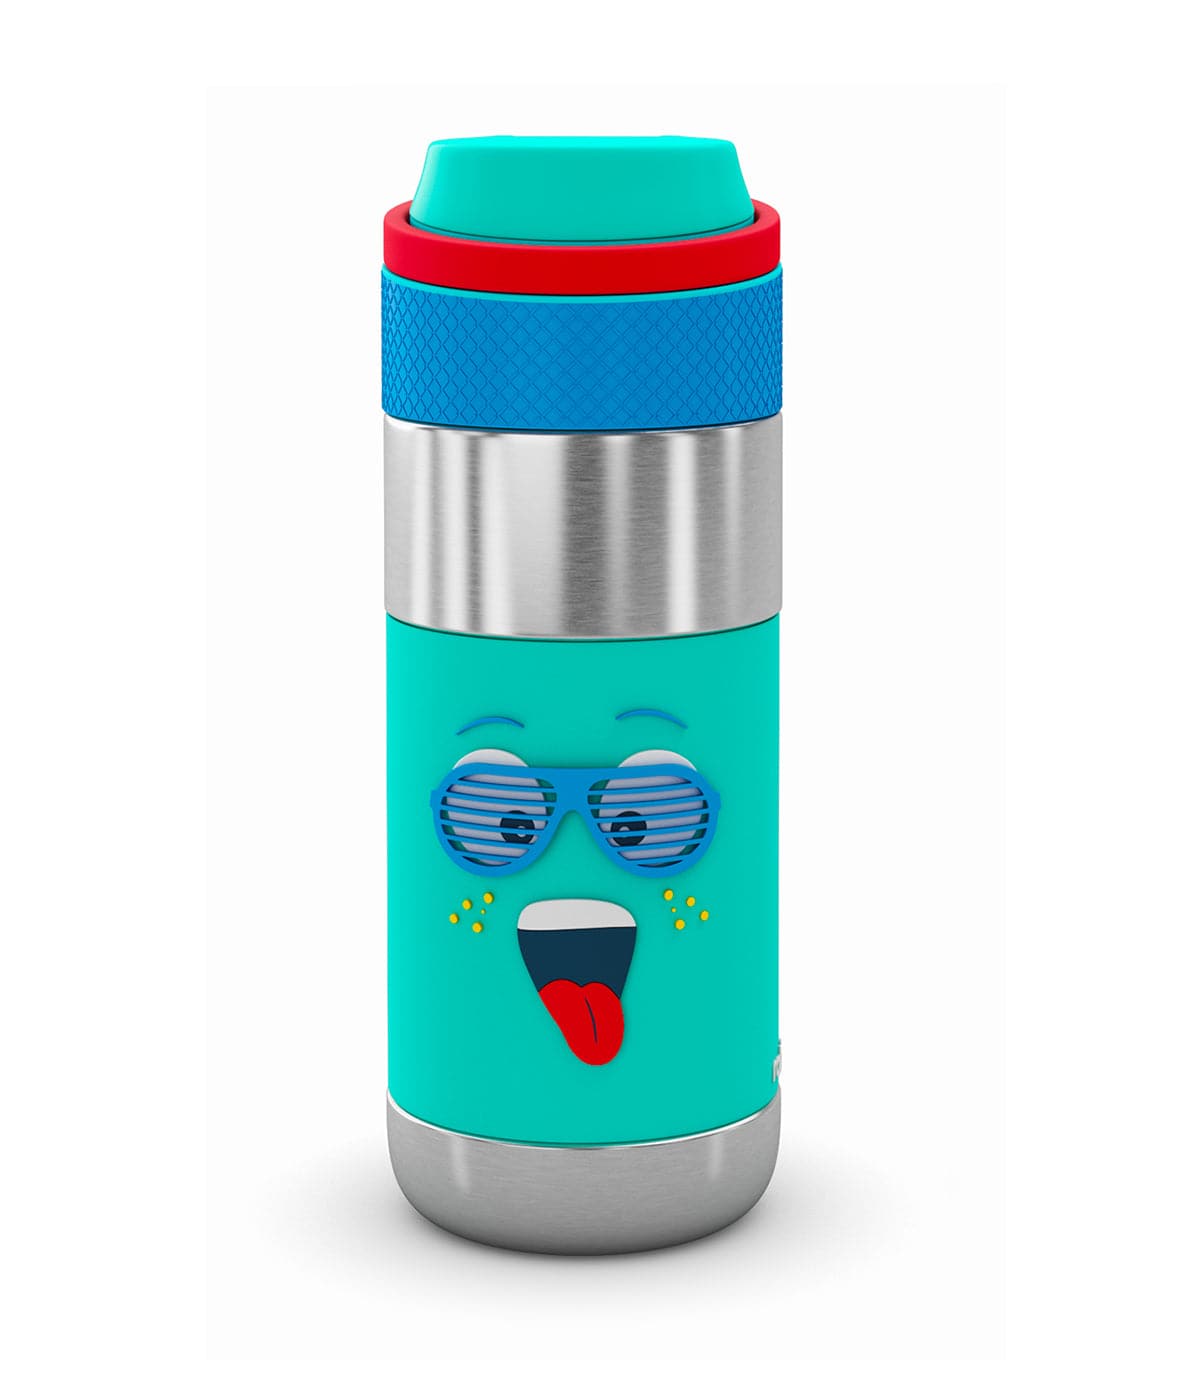 Less is bore combo (2 Clean Lock Insulated Stainless Steel Bottles + 2 Snap Lock Sipper Bottles + 2 Better Cups with Training Lid)